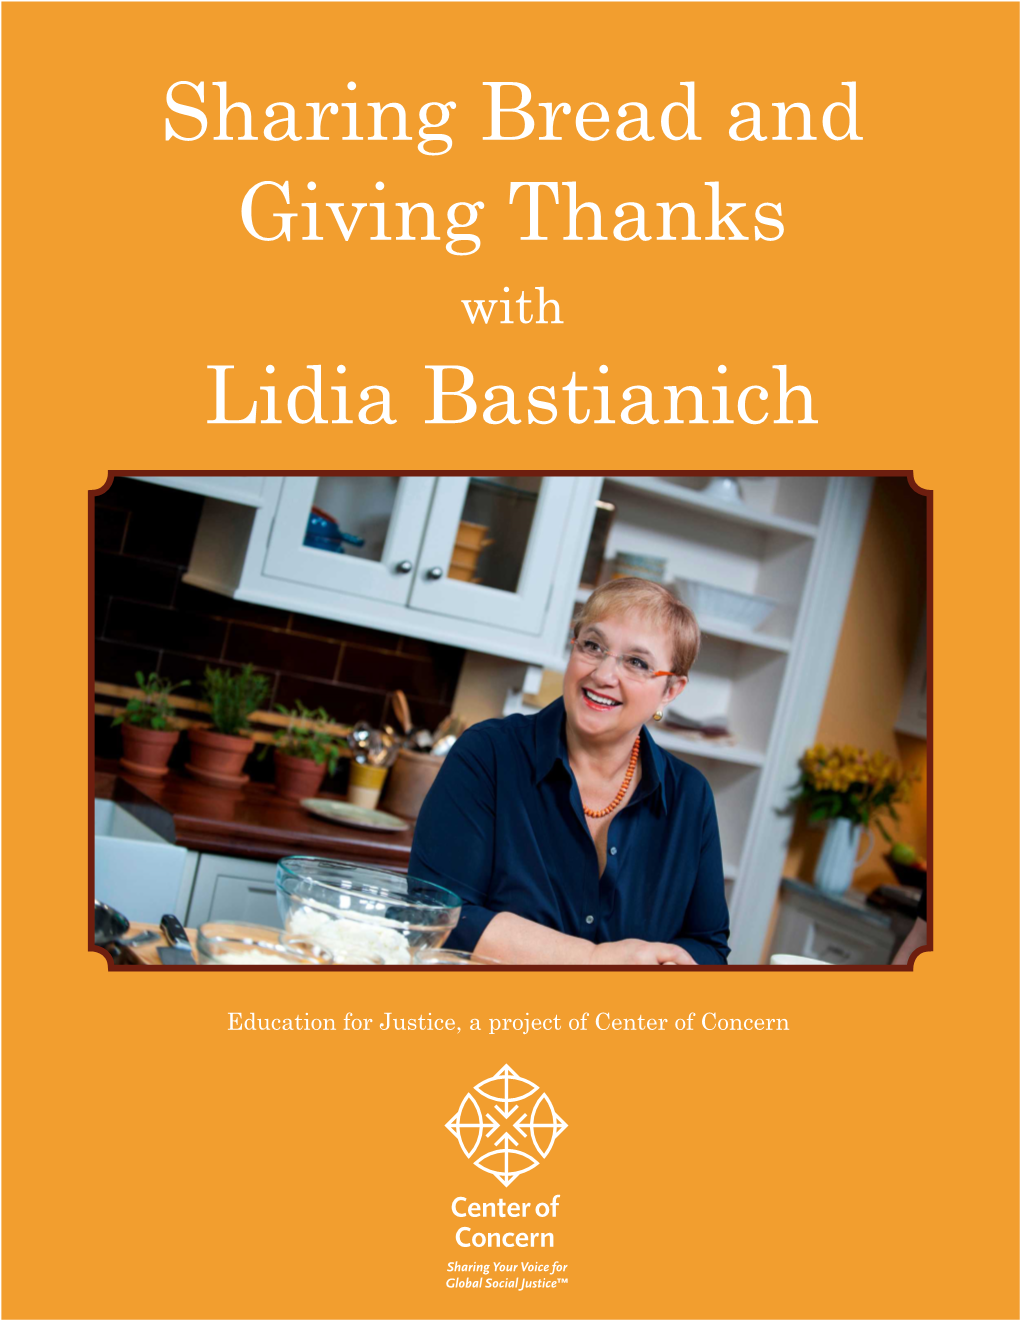 Sharing Bread and Giving Thanks Lidia Bastianich